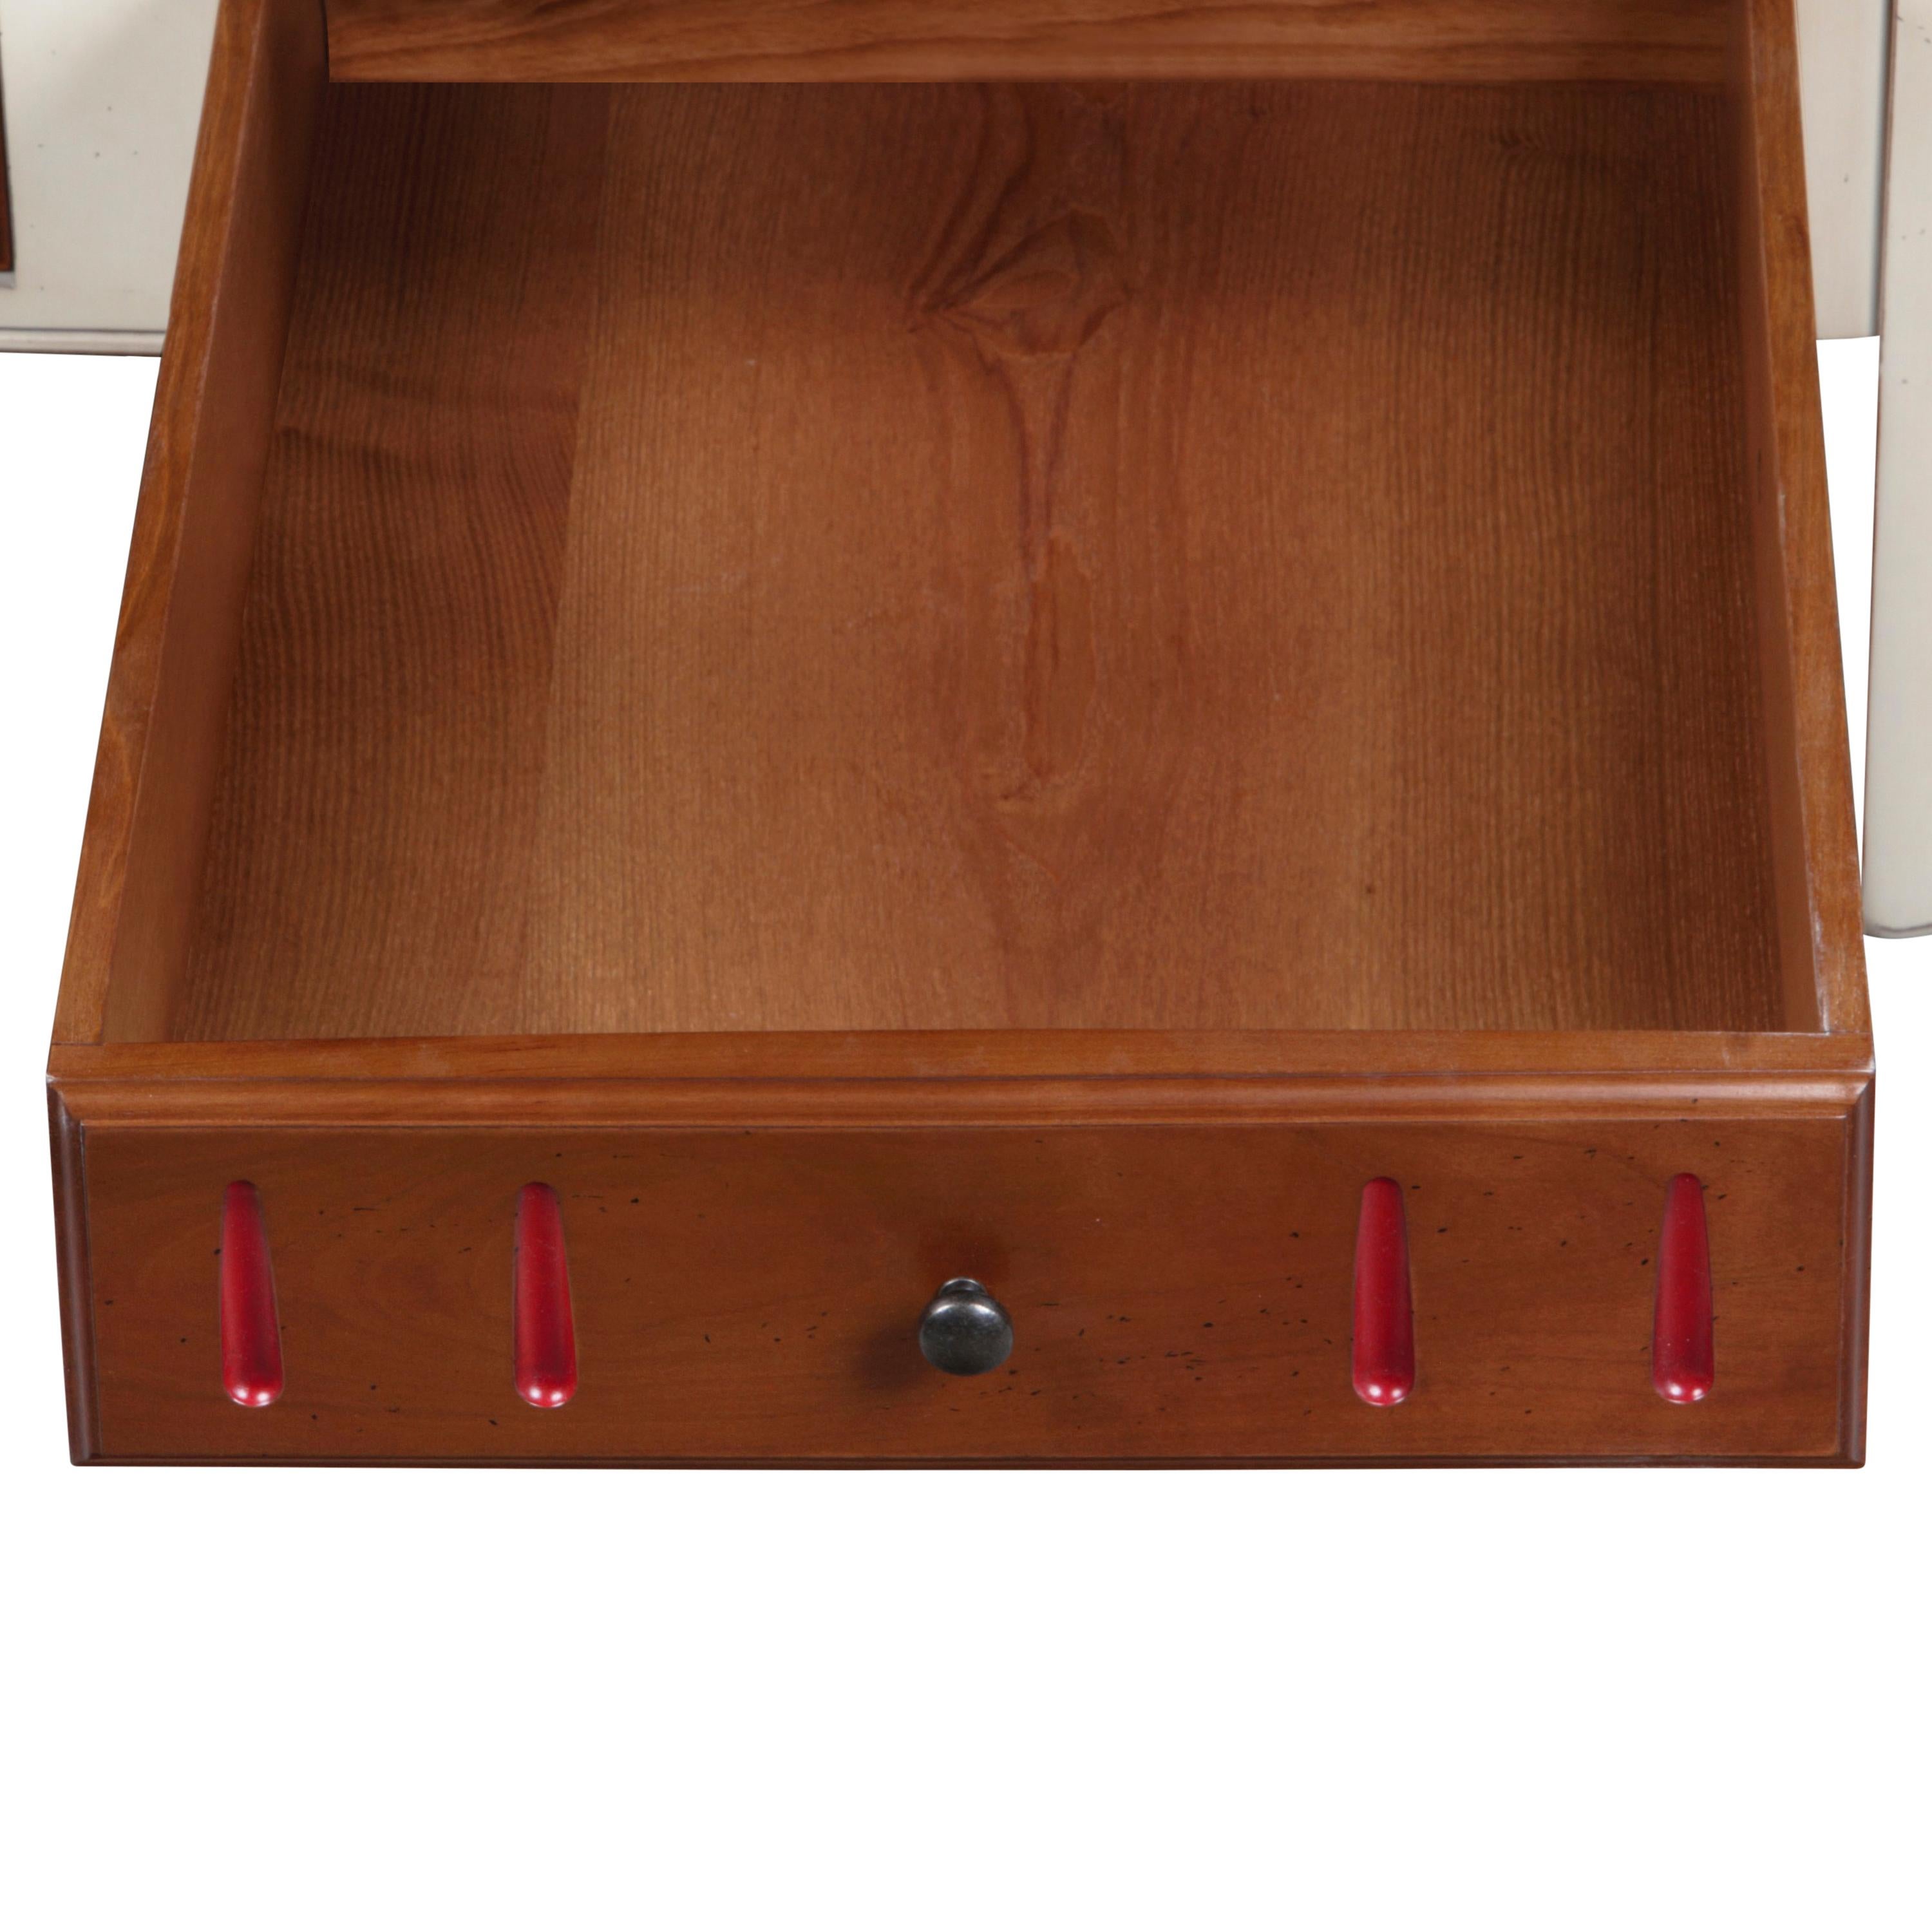 Contemporary Coffee Table Tradition in Cherry Wood with 2 Drawers, 100% Made in France For Sale